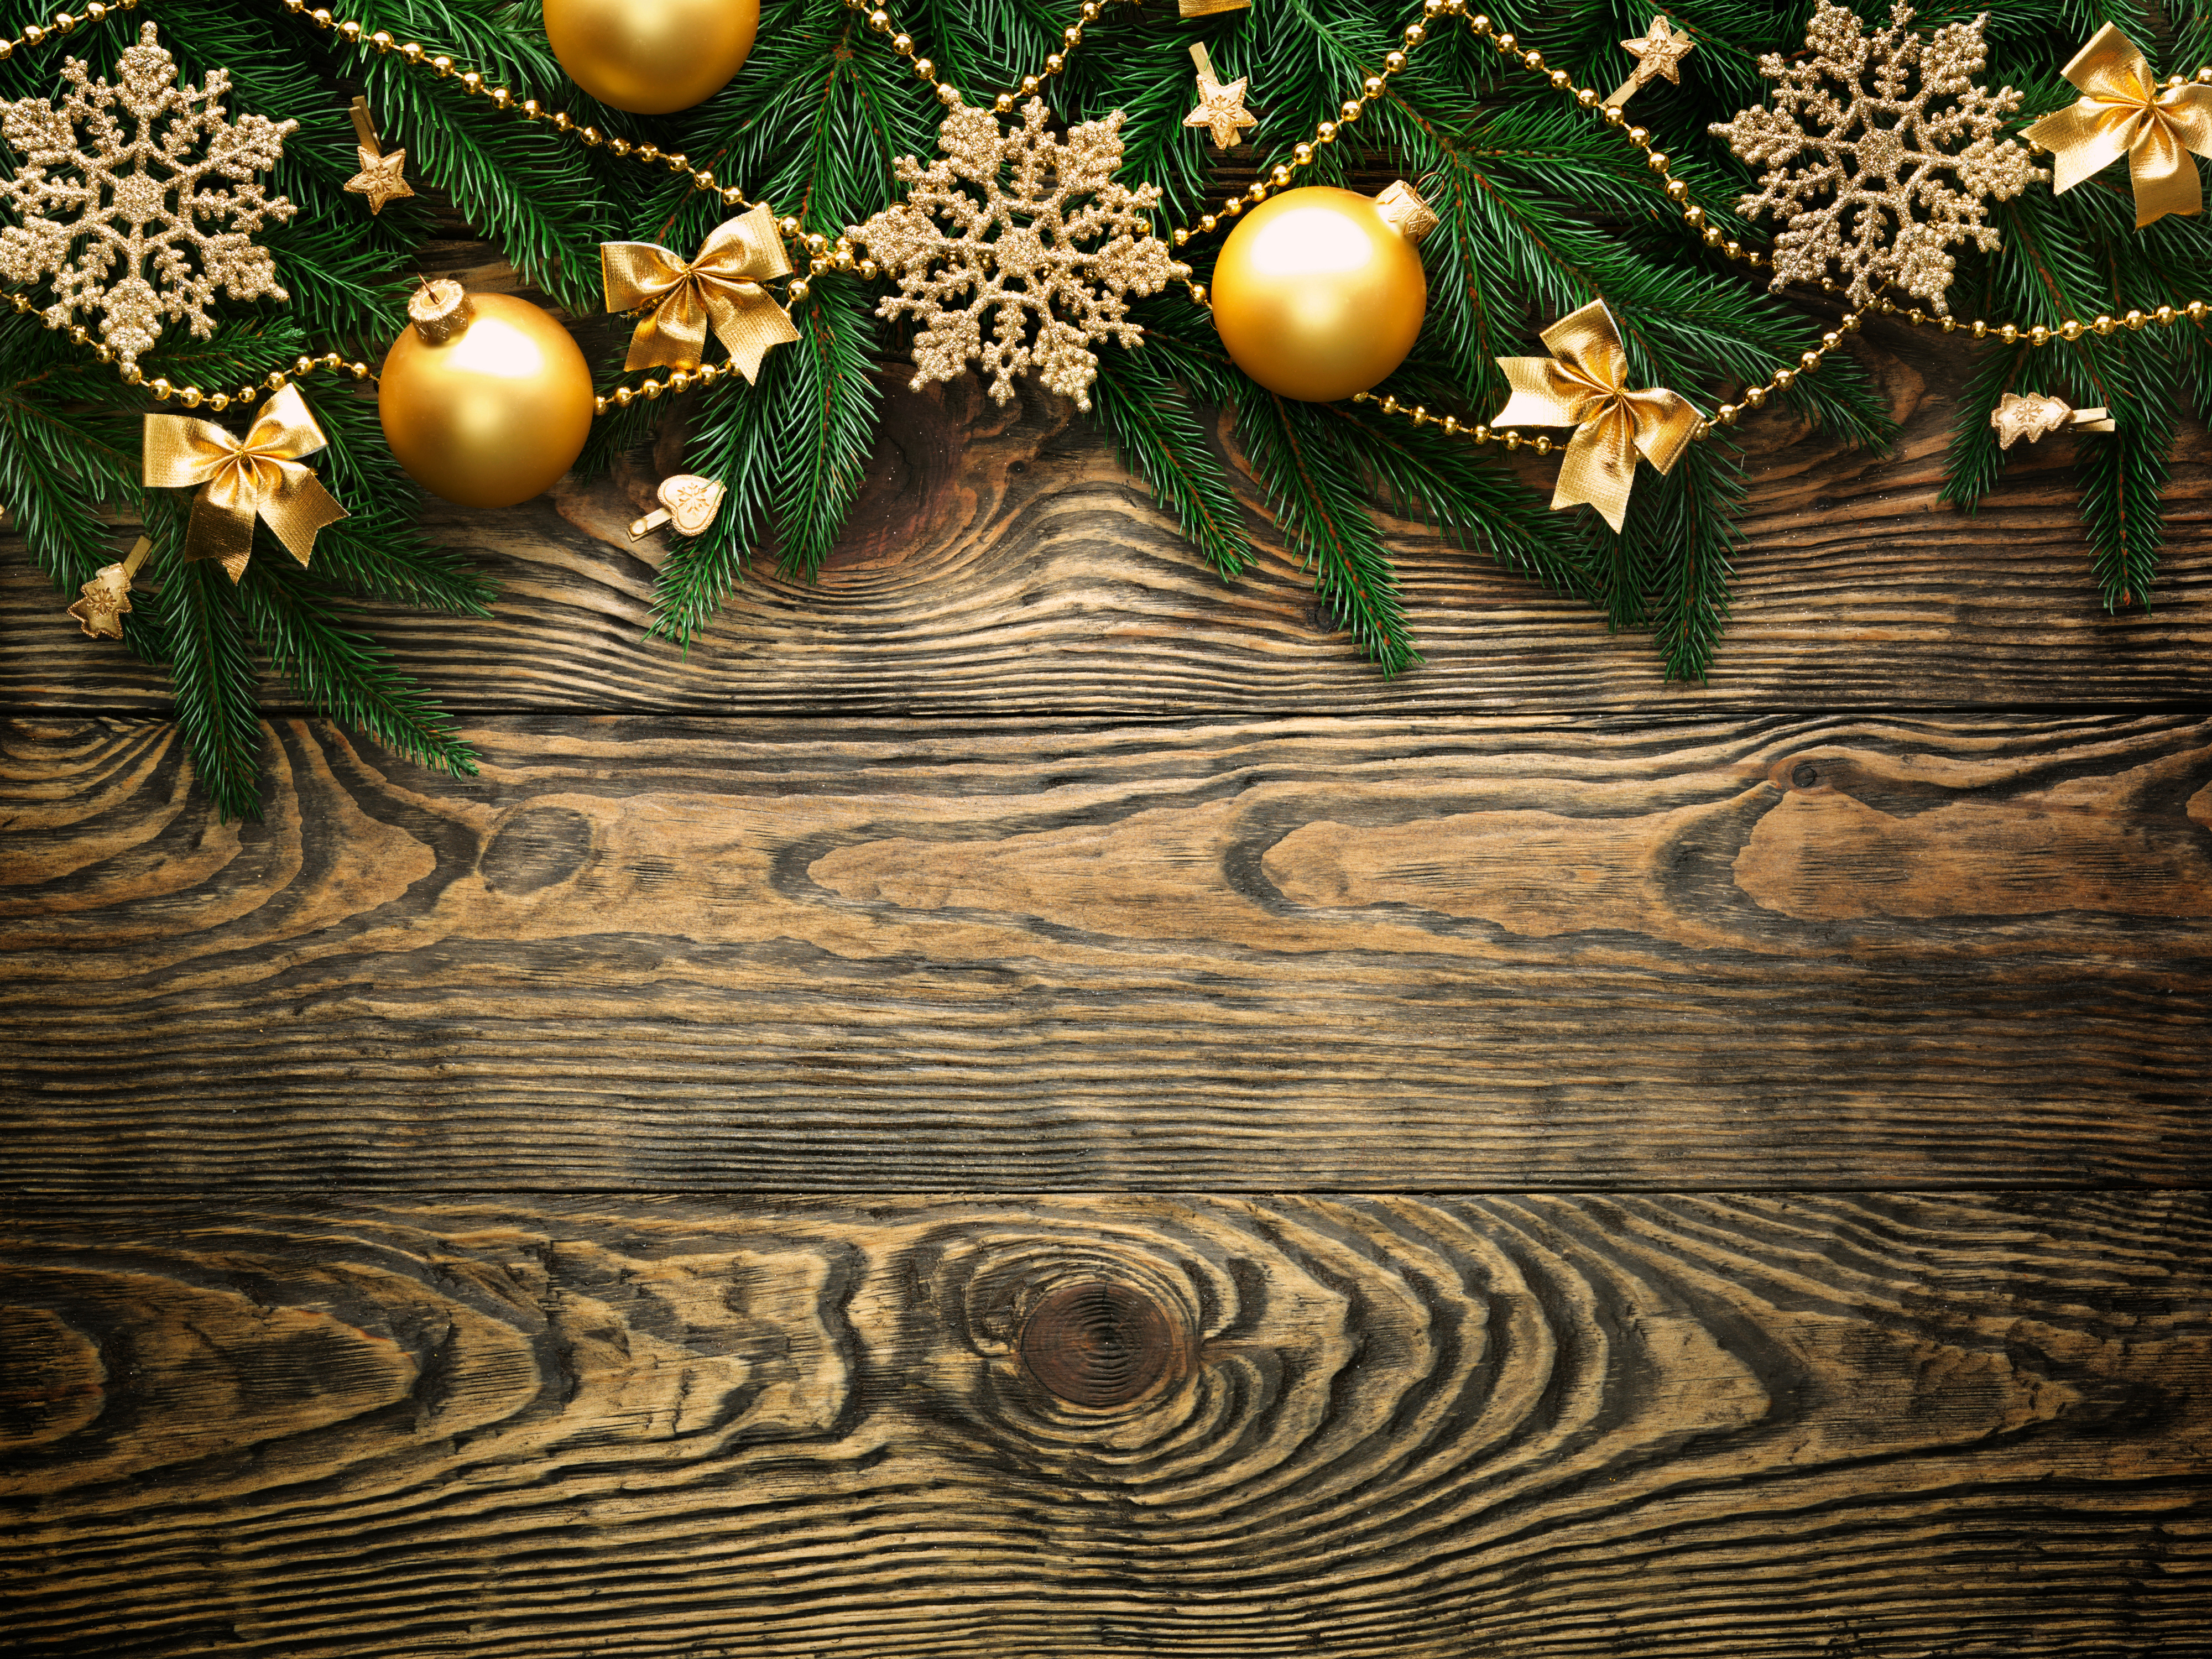 Wooden Christmas Background with Gold Ornaments | Gallery ...